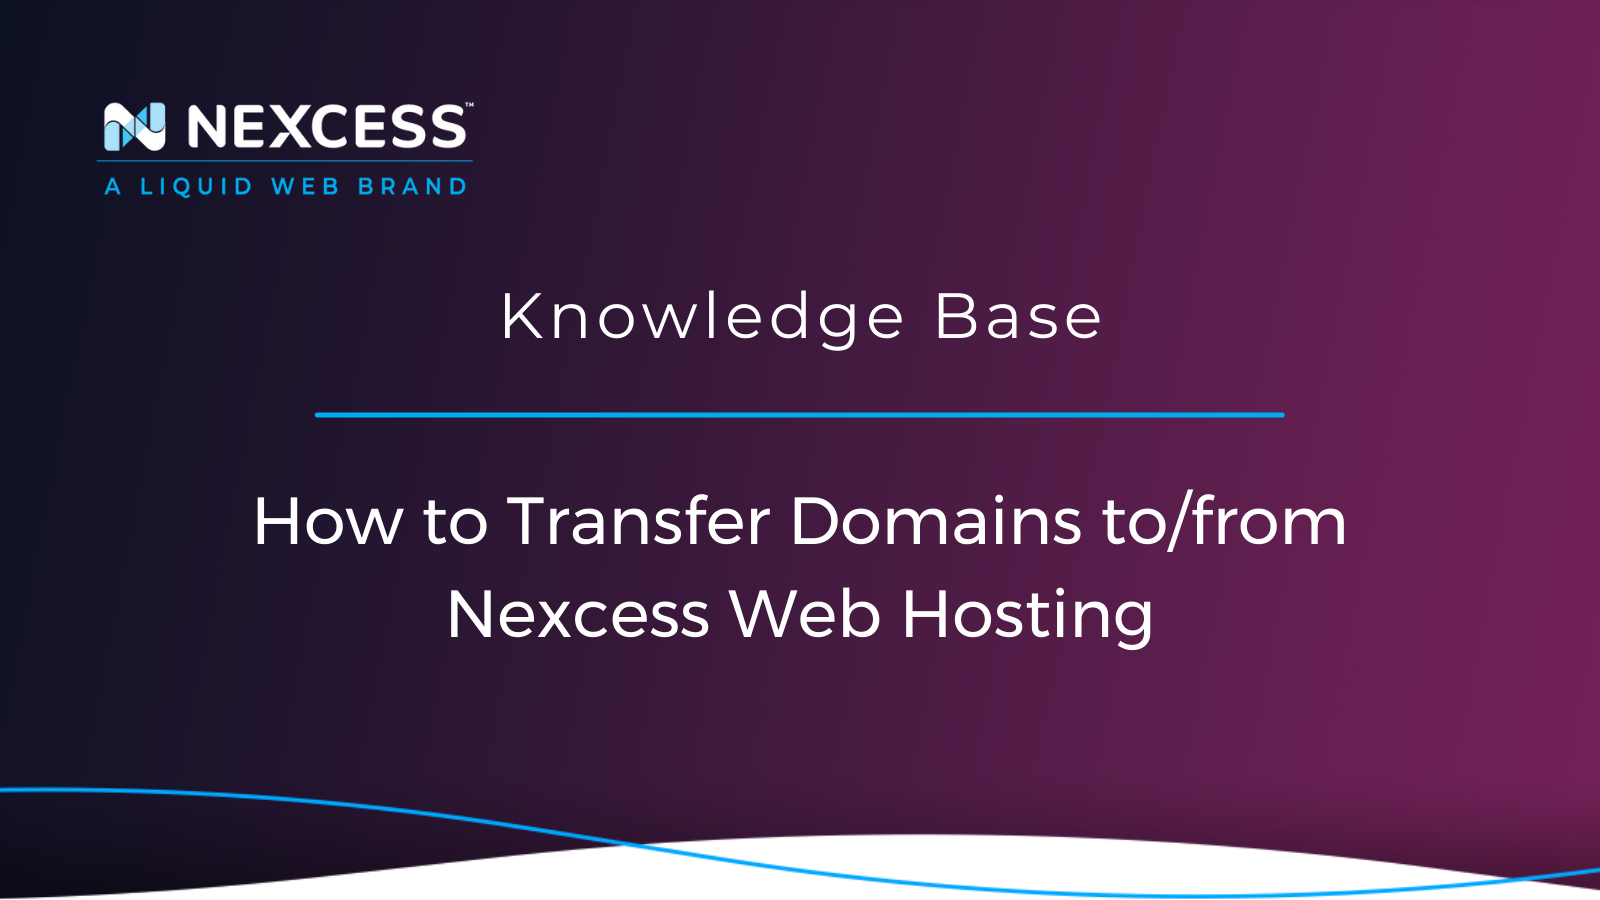 How to Transfer Domains to/from Nexcess Web Hosting